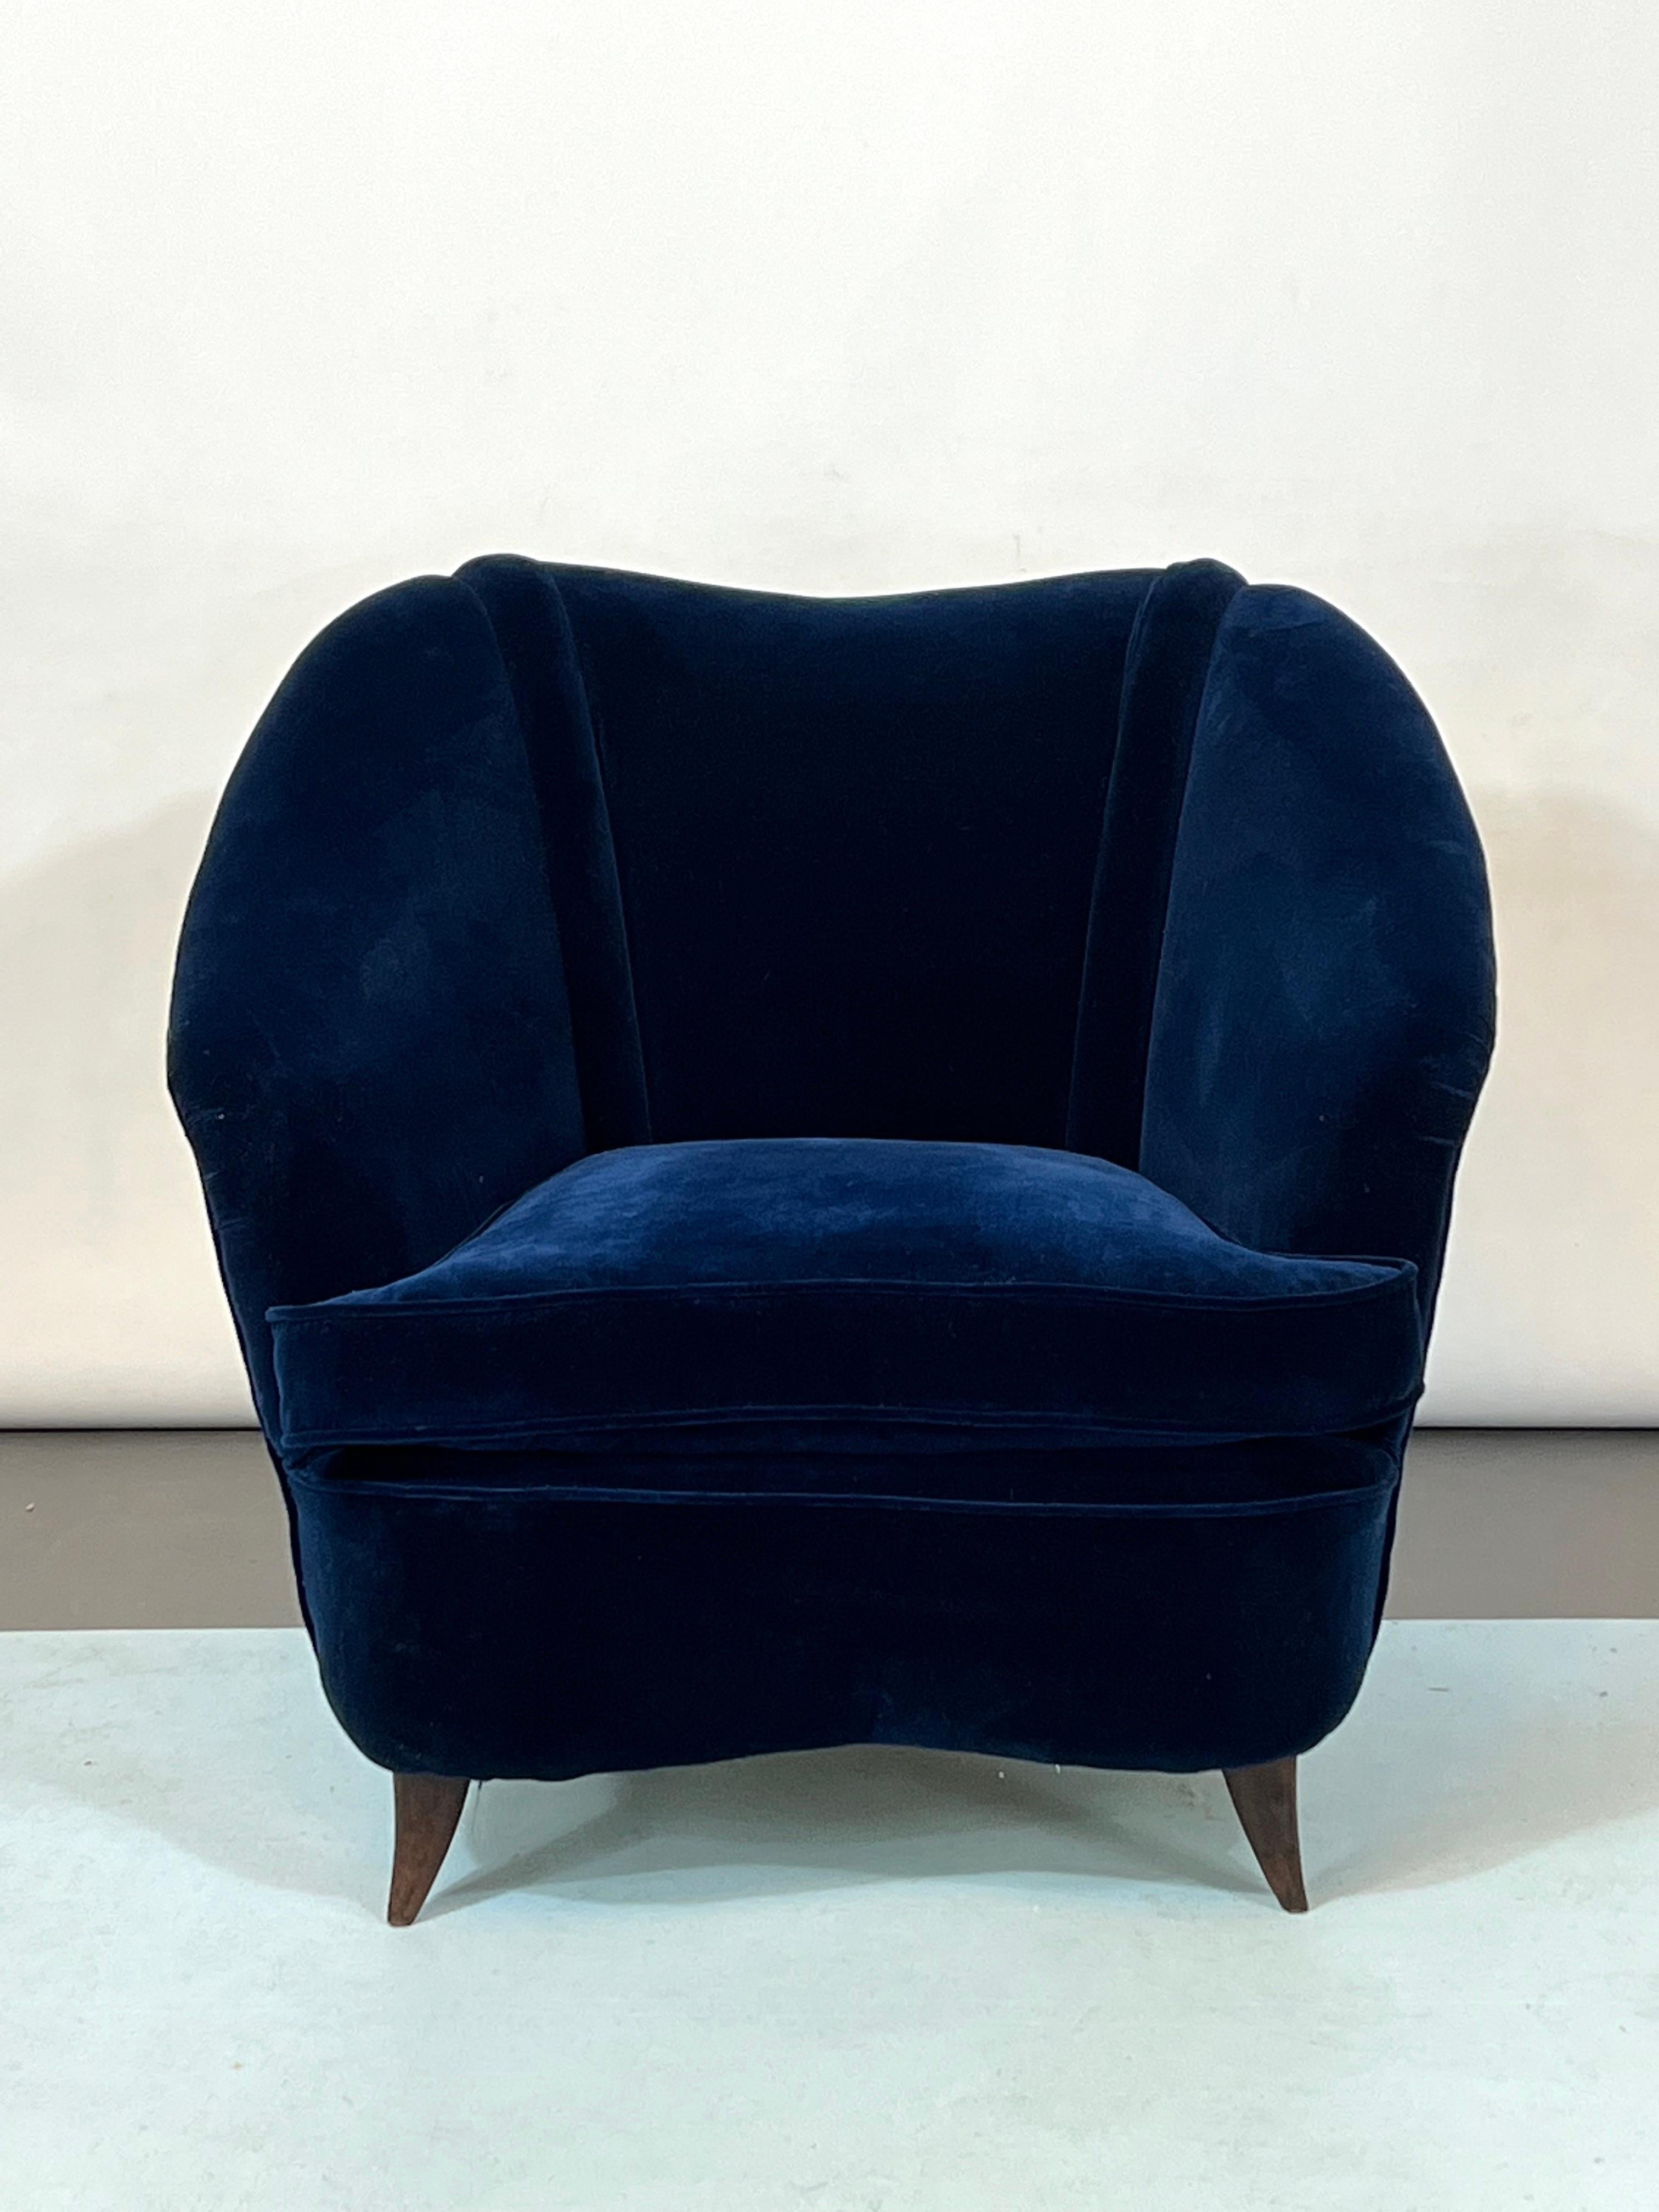 Great condition for this armchair designed by Gio Ponti for Casa e Giardino, manufactured in Italy during the 50s.